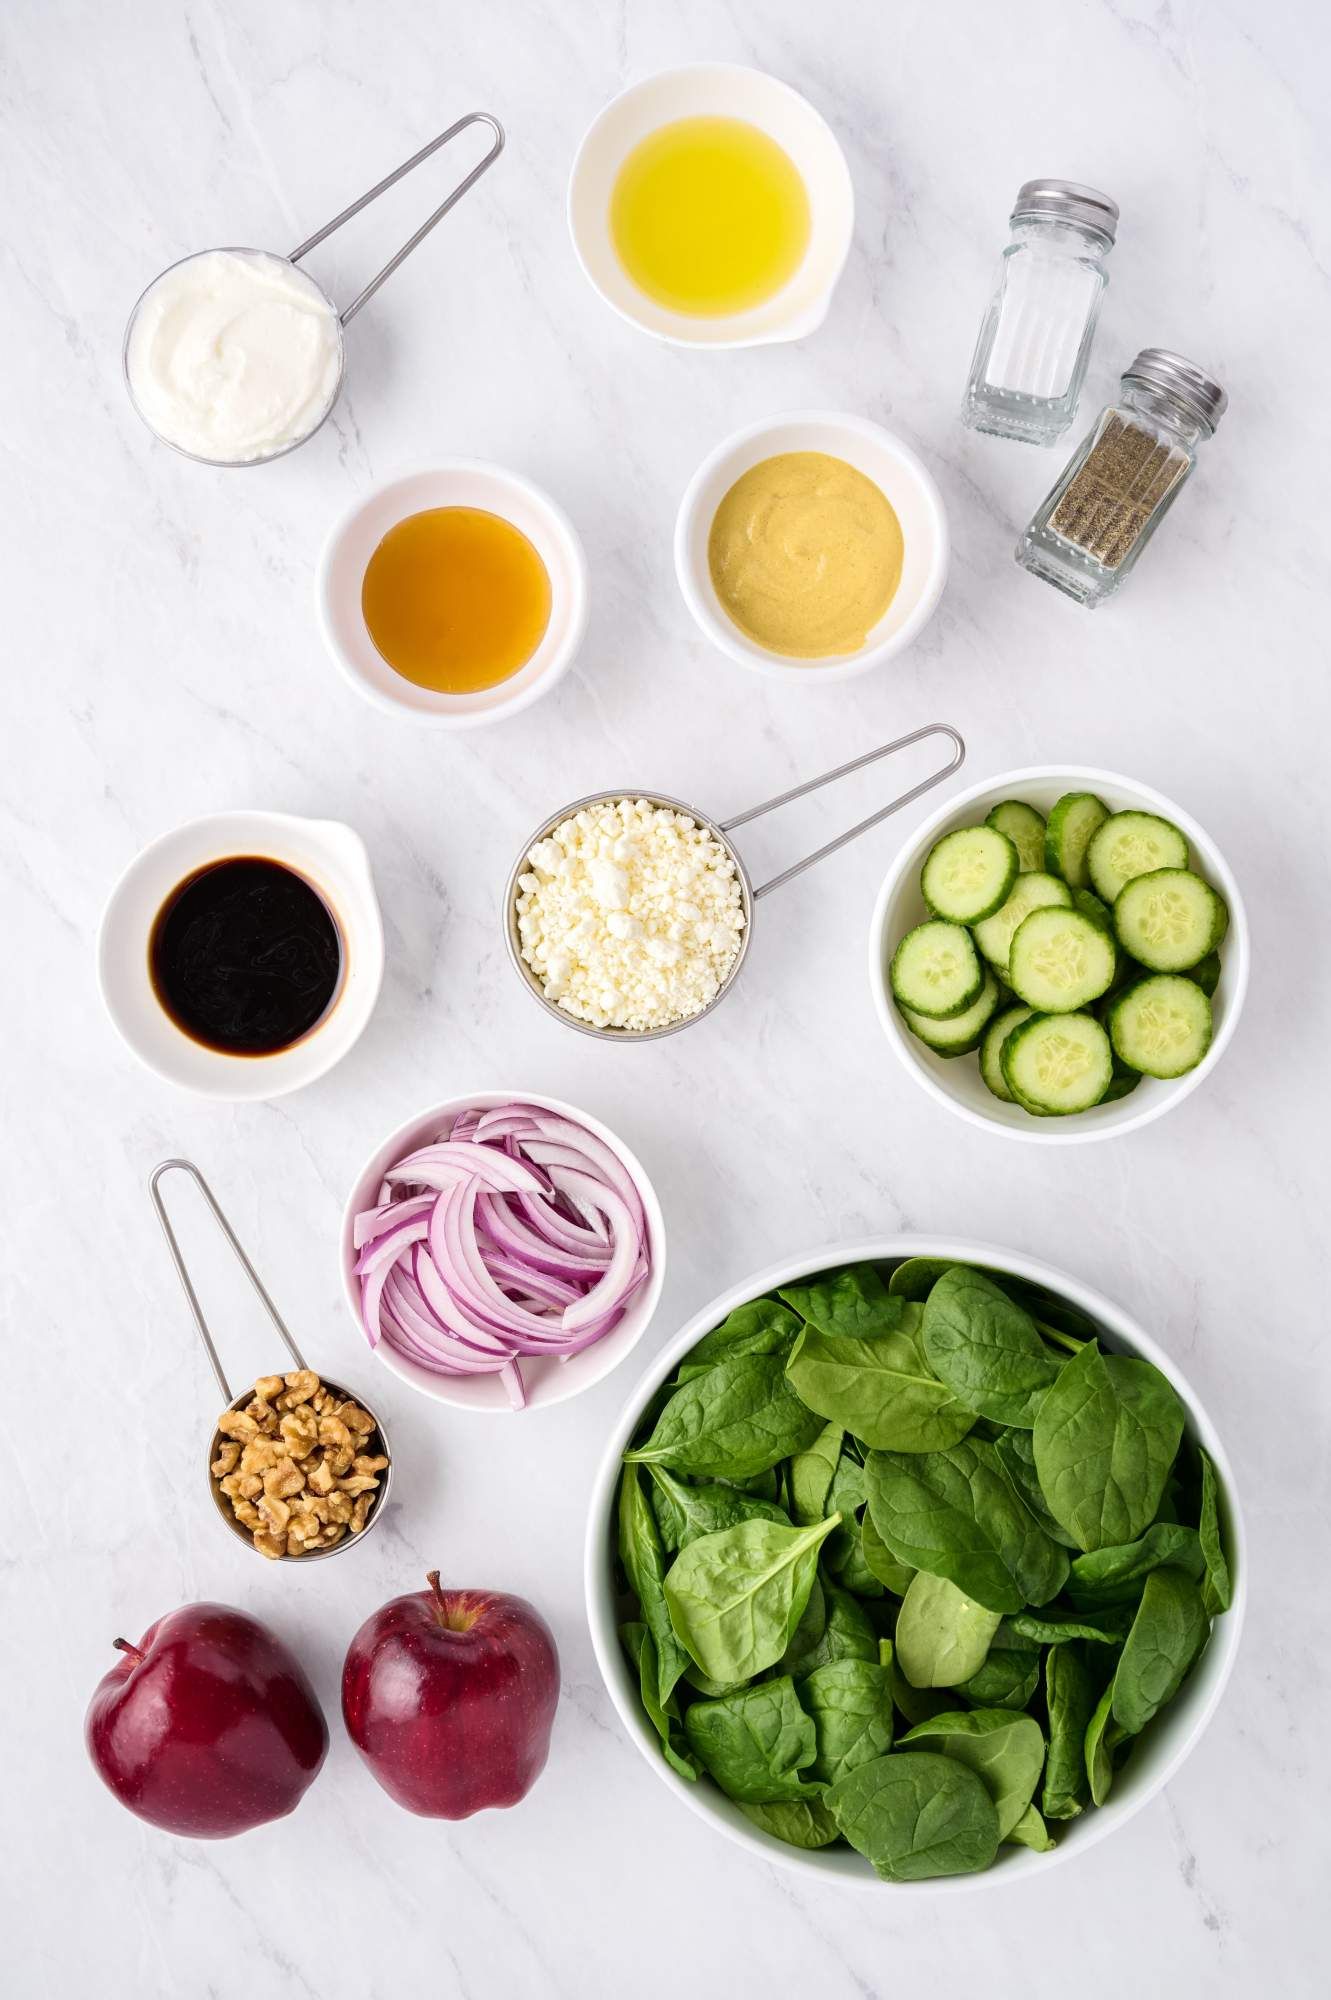 Ingredients for spinach salad including fresh baby spinach, red onions, cucumbers, apples, walnuts, goat cheese, and balsamic vinegar.